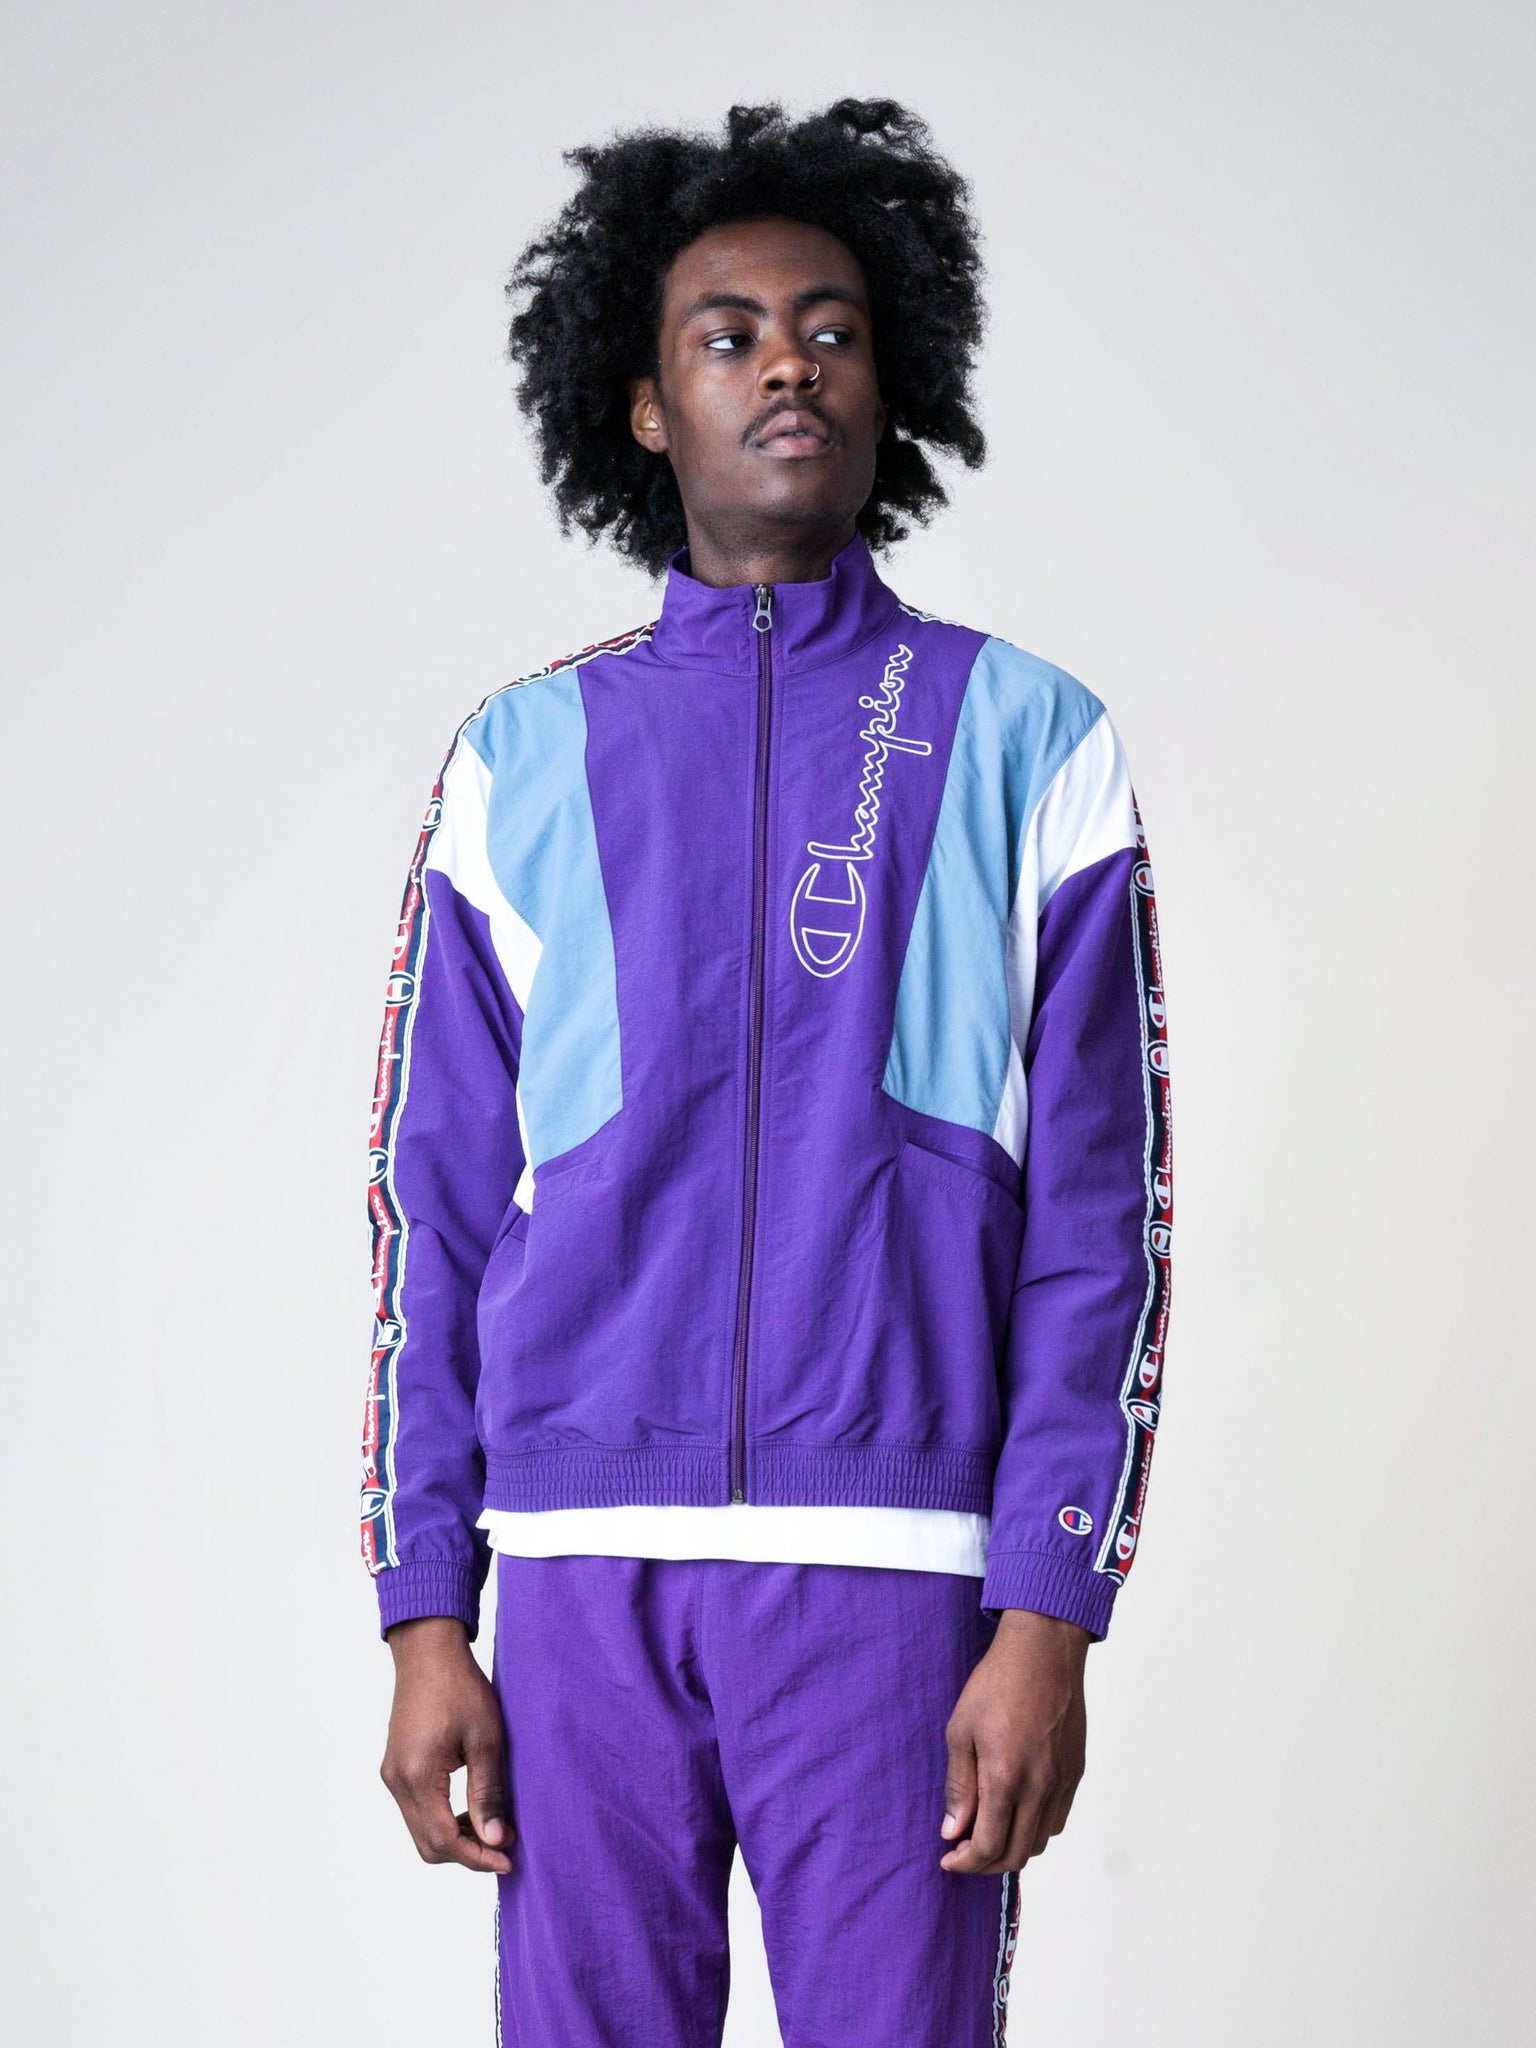 Buy Outerwear Online at UNION LOS ANGELES